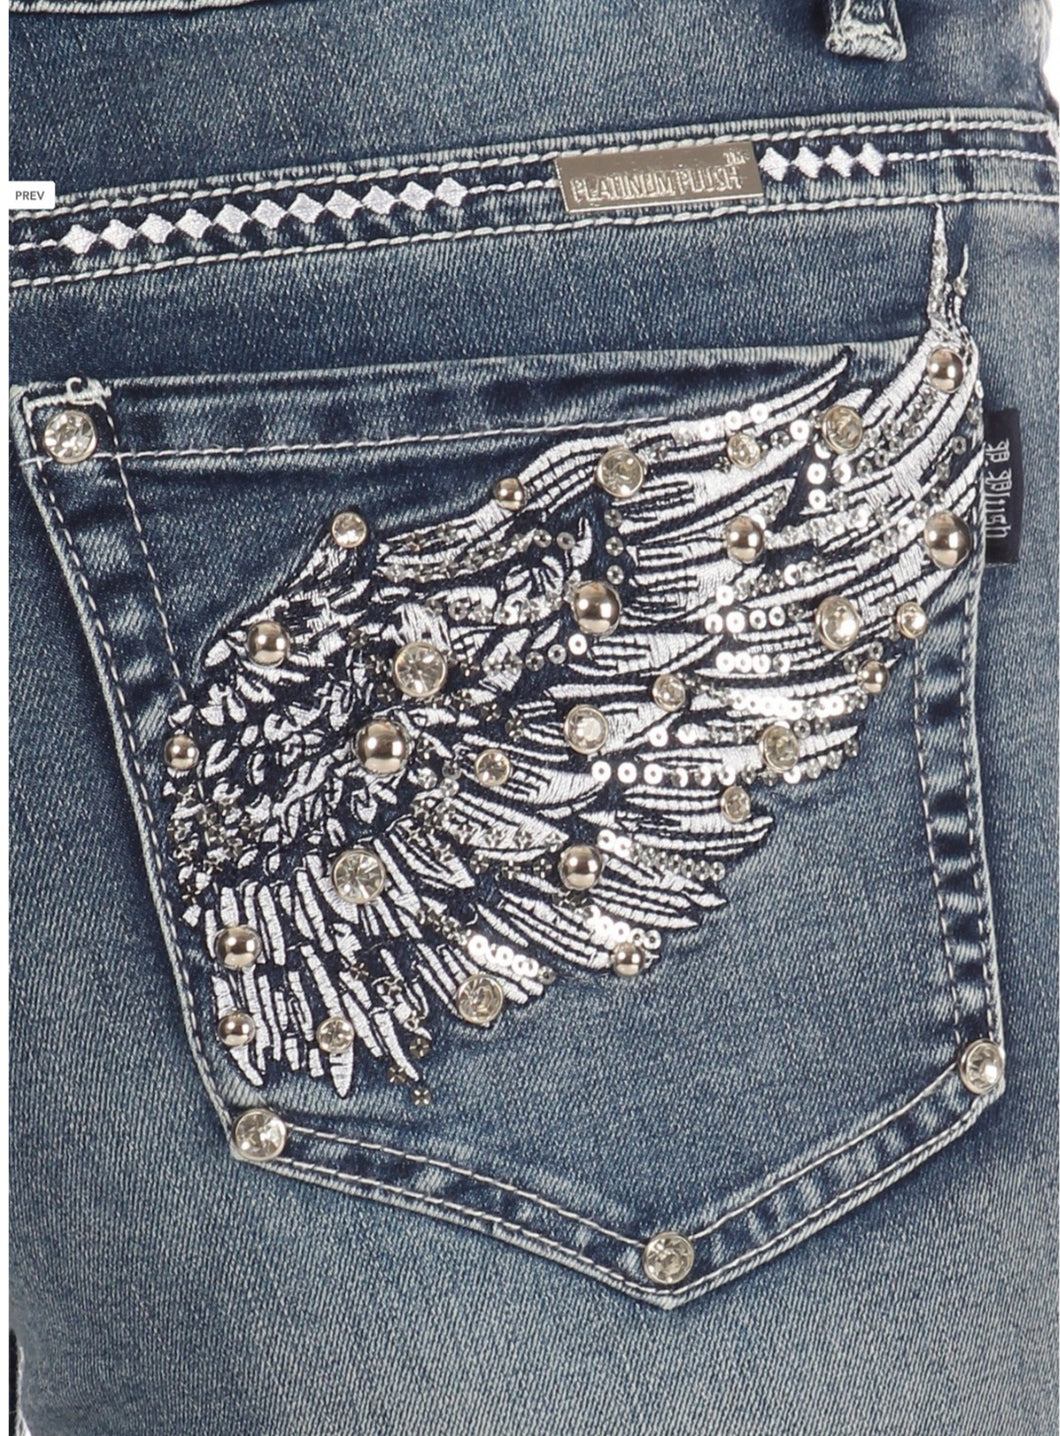 NEW Rhinestone Cut-out Jeans – AnJill Or Not